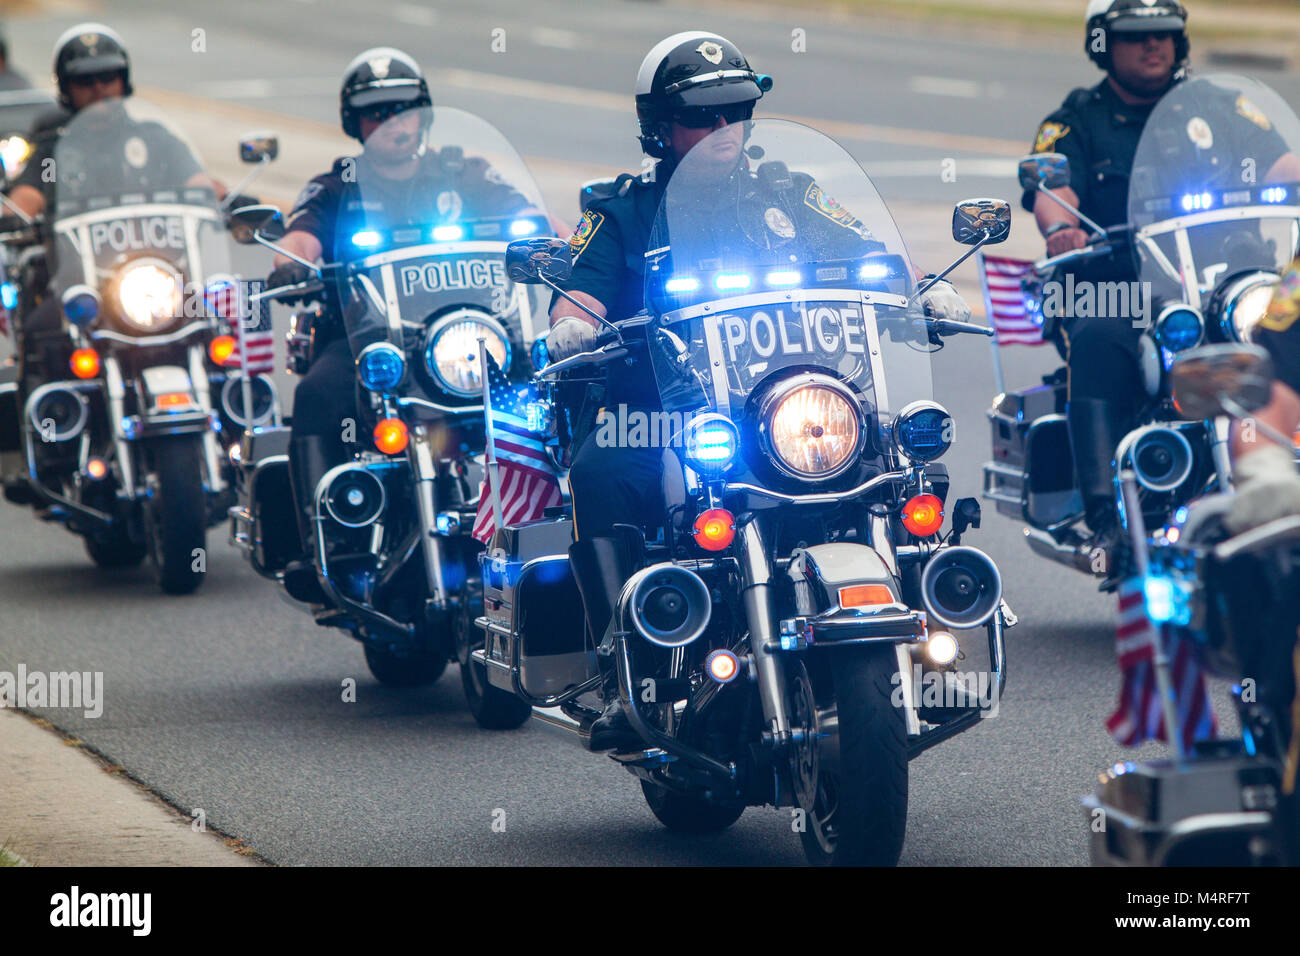 Several motorcycle cops provide an escort to a group of motorcyclists about to start a charity bike ride on October 7, 2017 in Buford, GA. Stock Photo